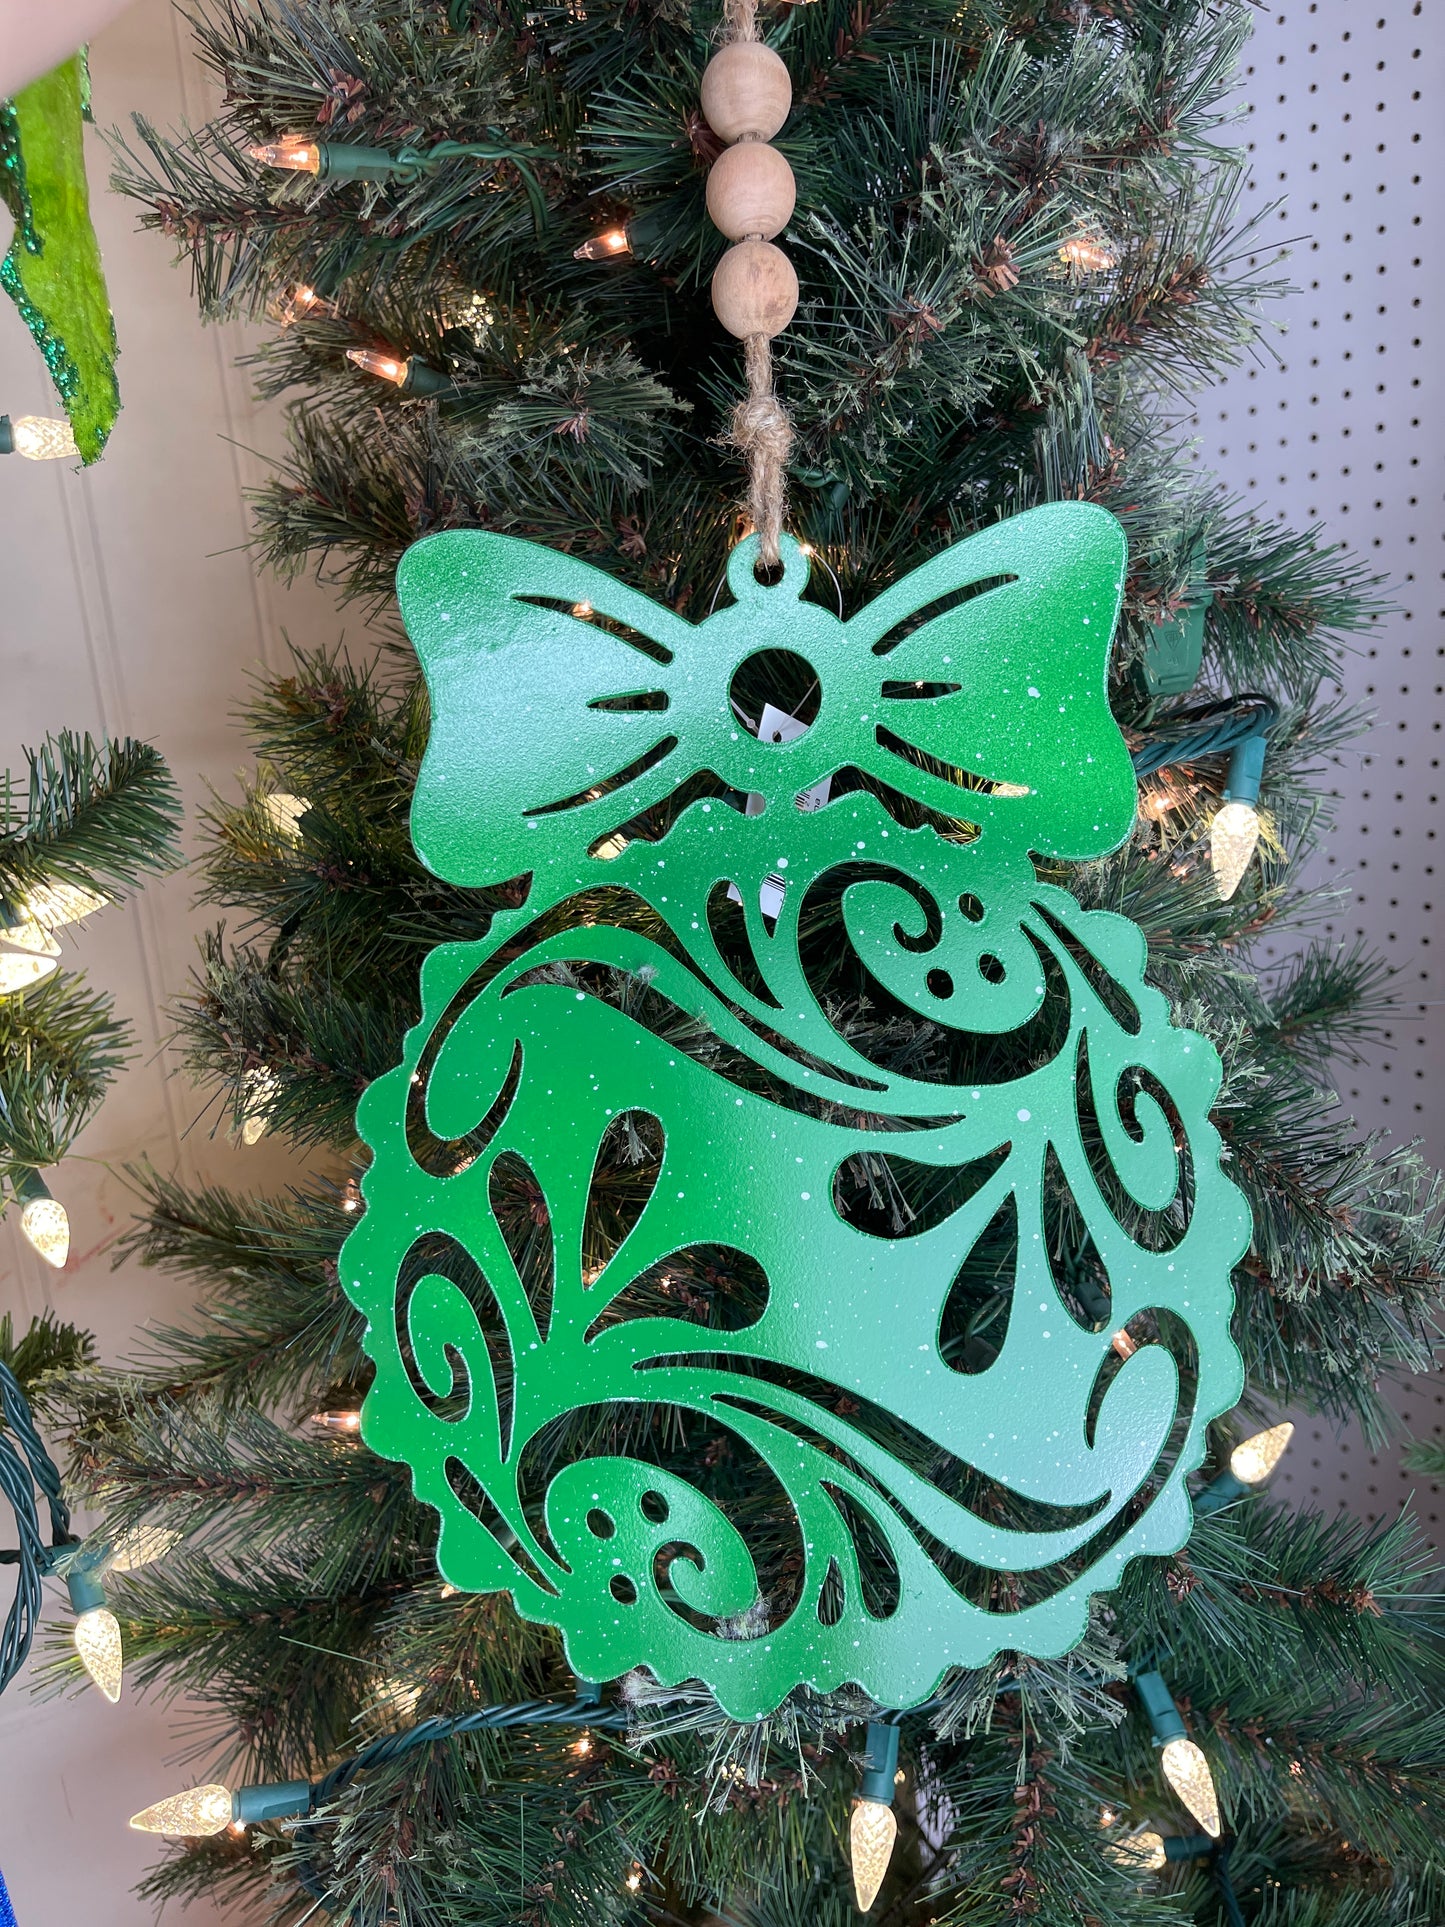 Red And Green Metal Cutout Christmas Ornament - 2 Styles